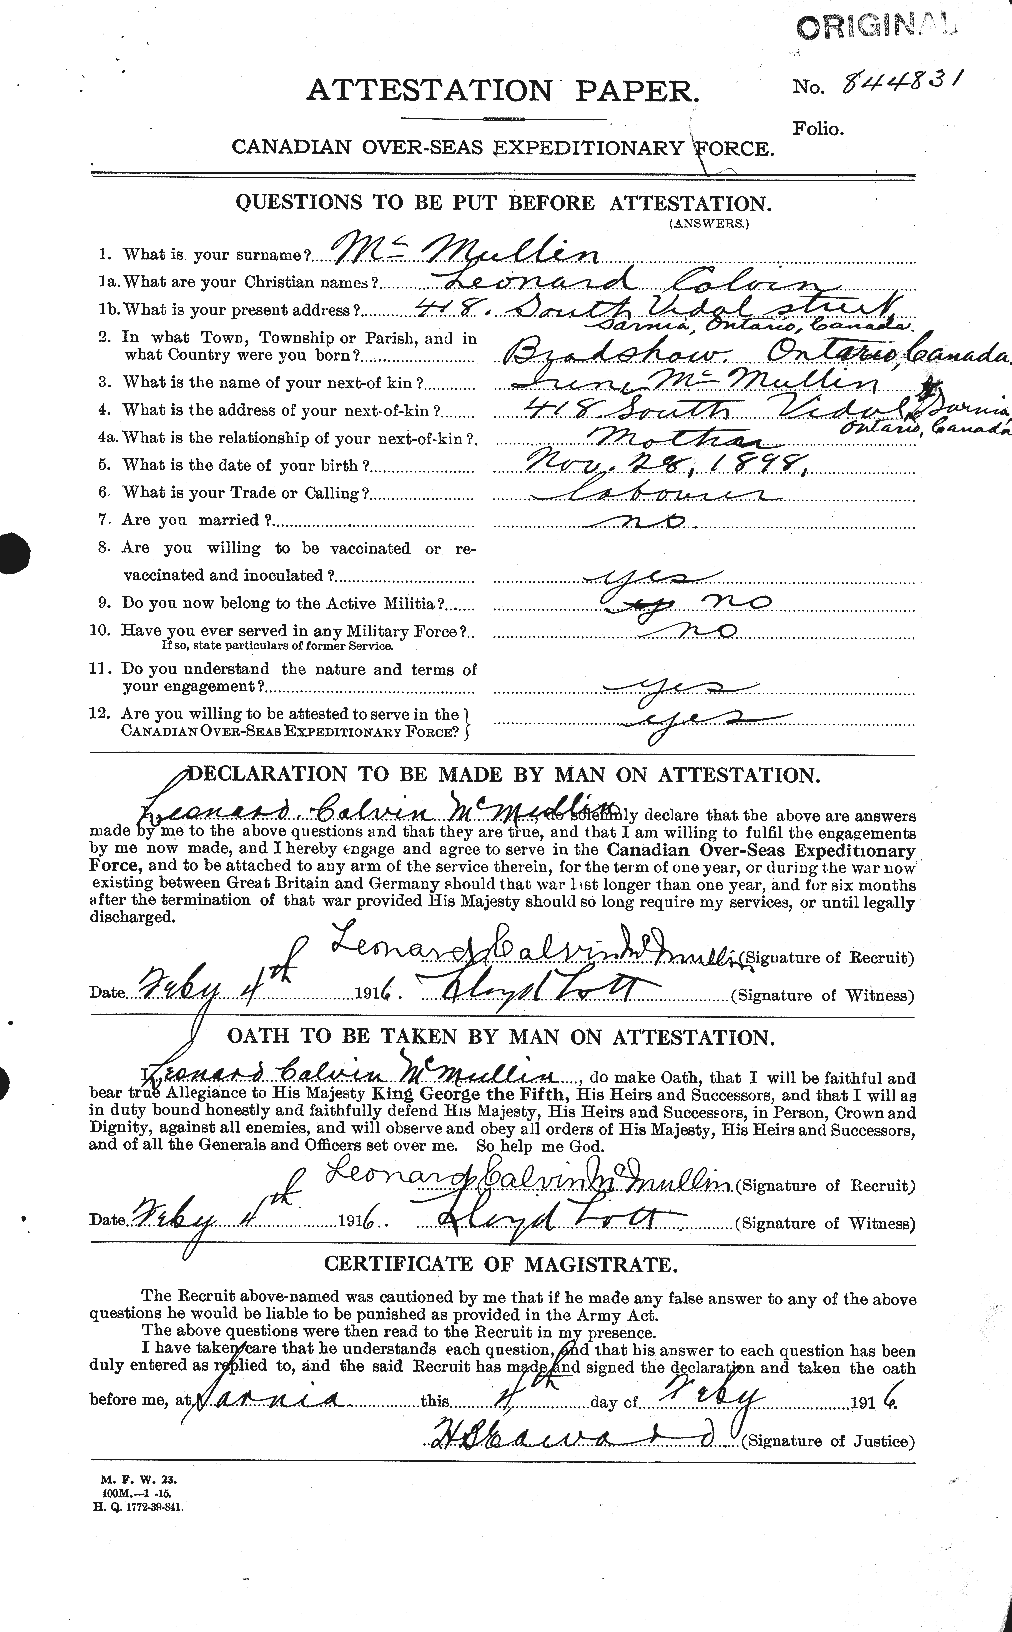 Personnel Records of the First World War - CEF 539314a